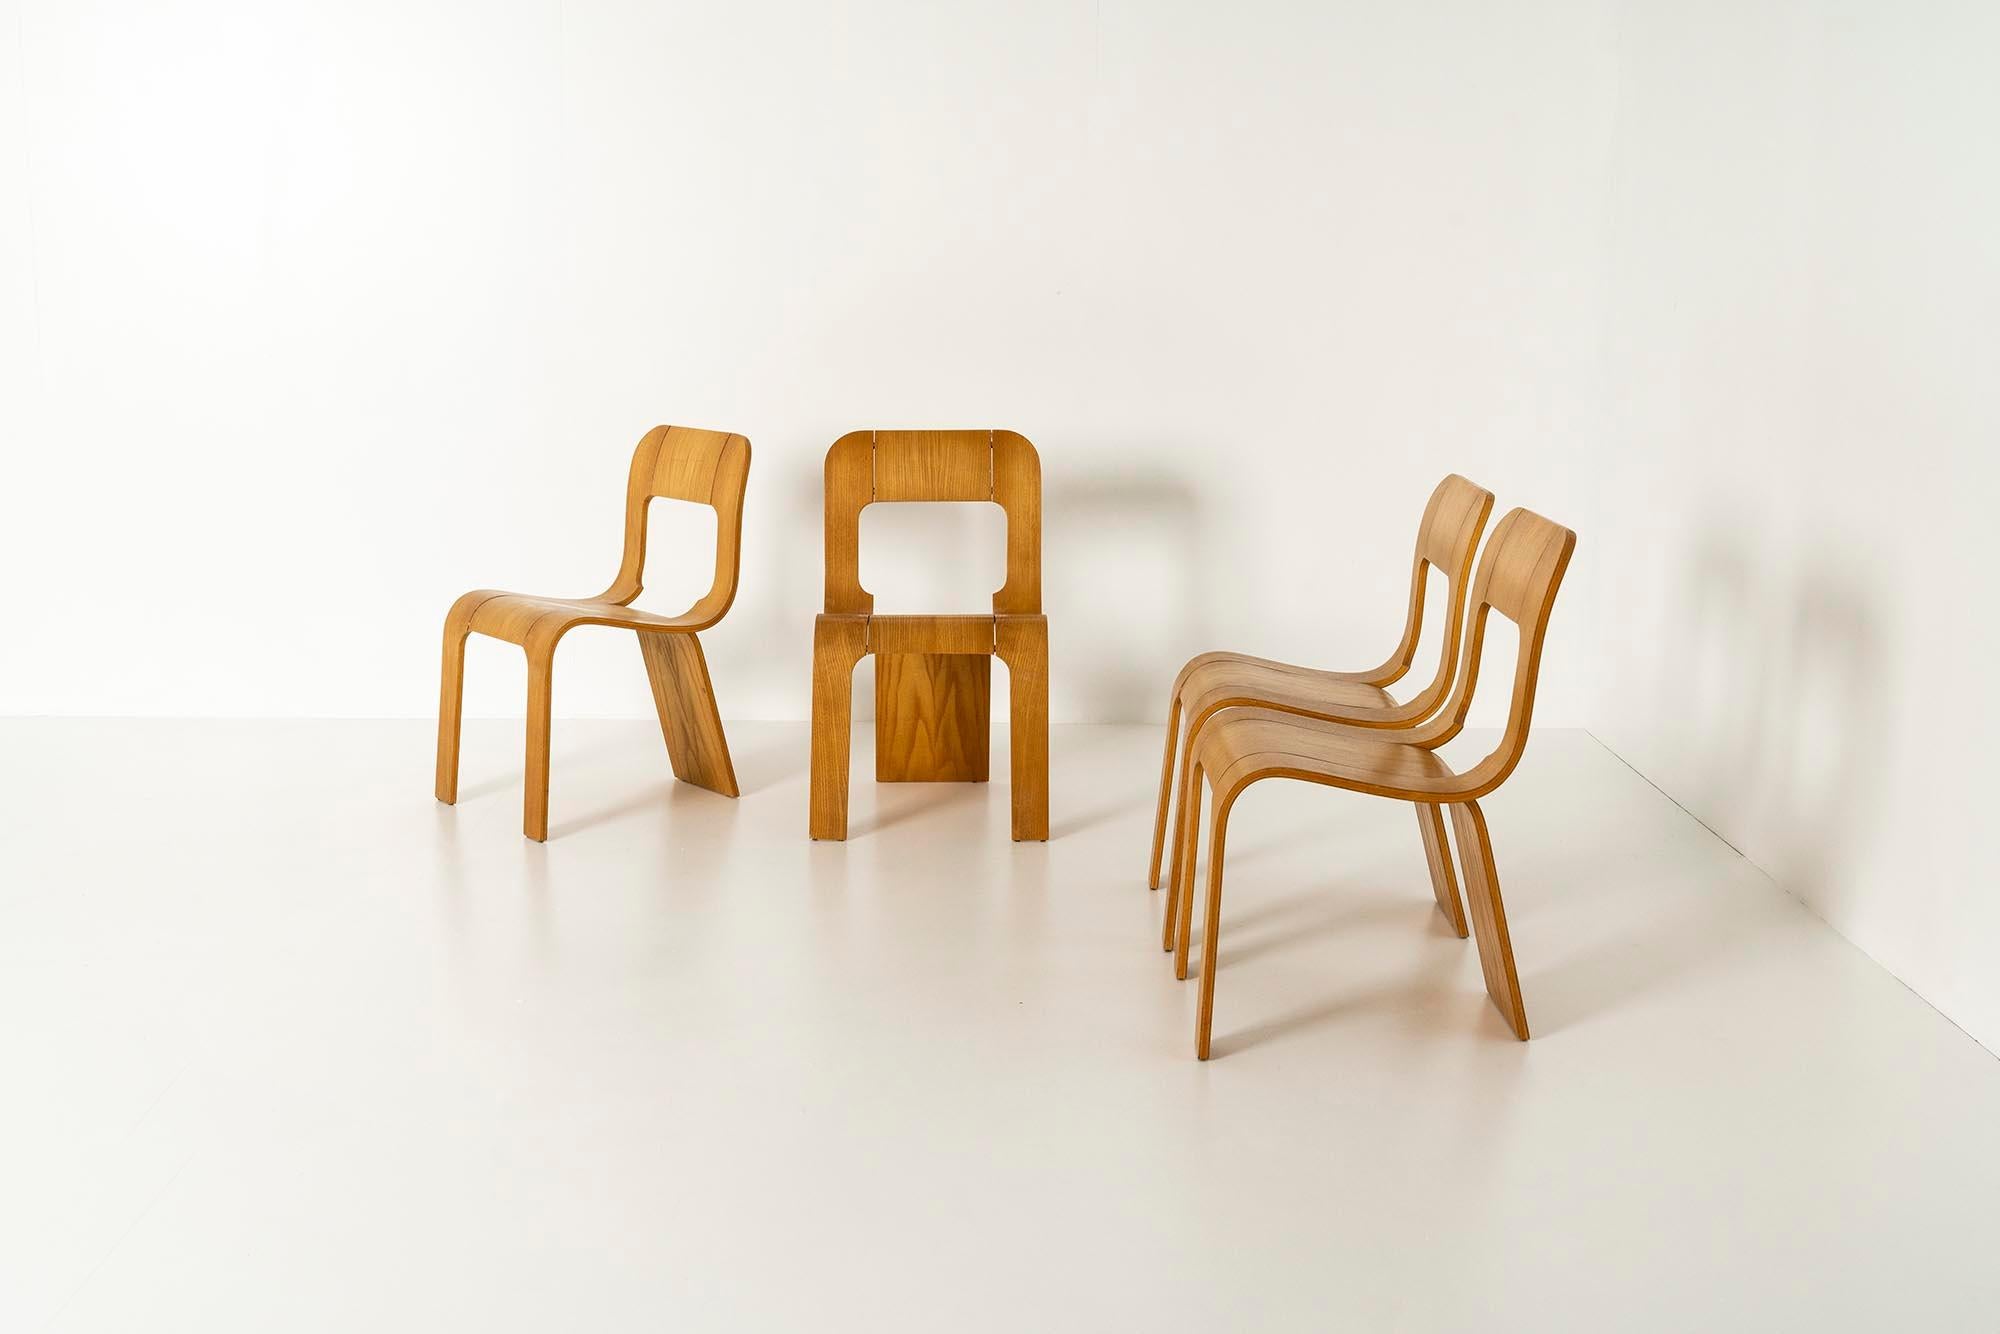 Gigi Sabadin, set of four stackable chairs 'Model S' for Stilwood, Italy ca 1973. These vintage Italian chairs are made of bent plywood with ash veneer and finish. The design has organic shapes and three legs. The backrest has an opening. These